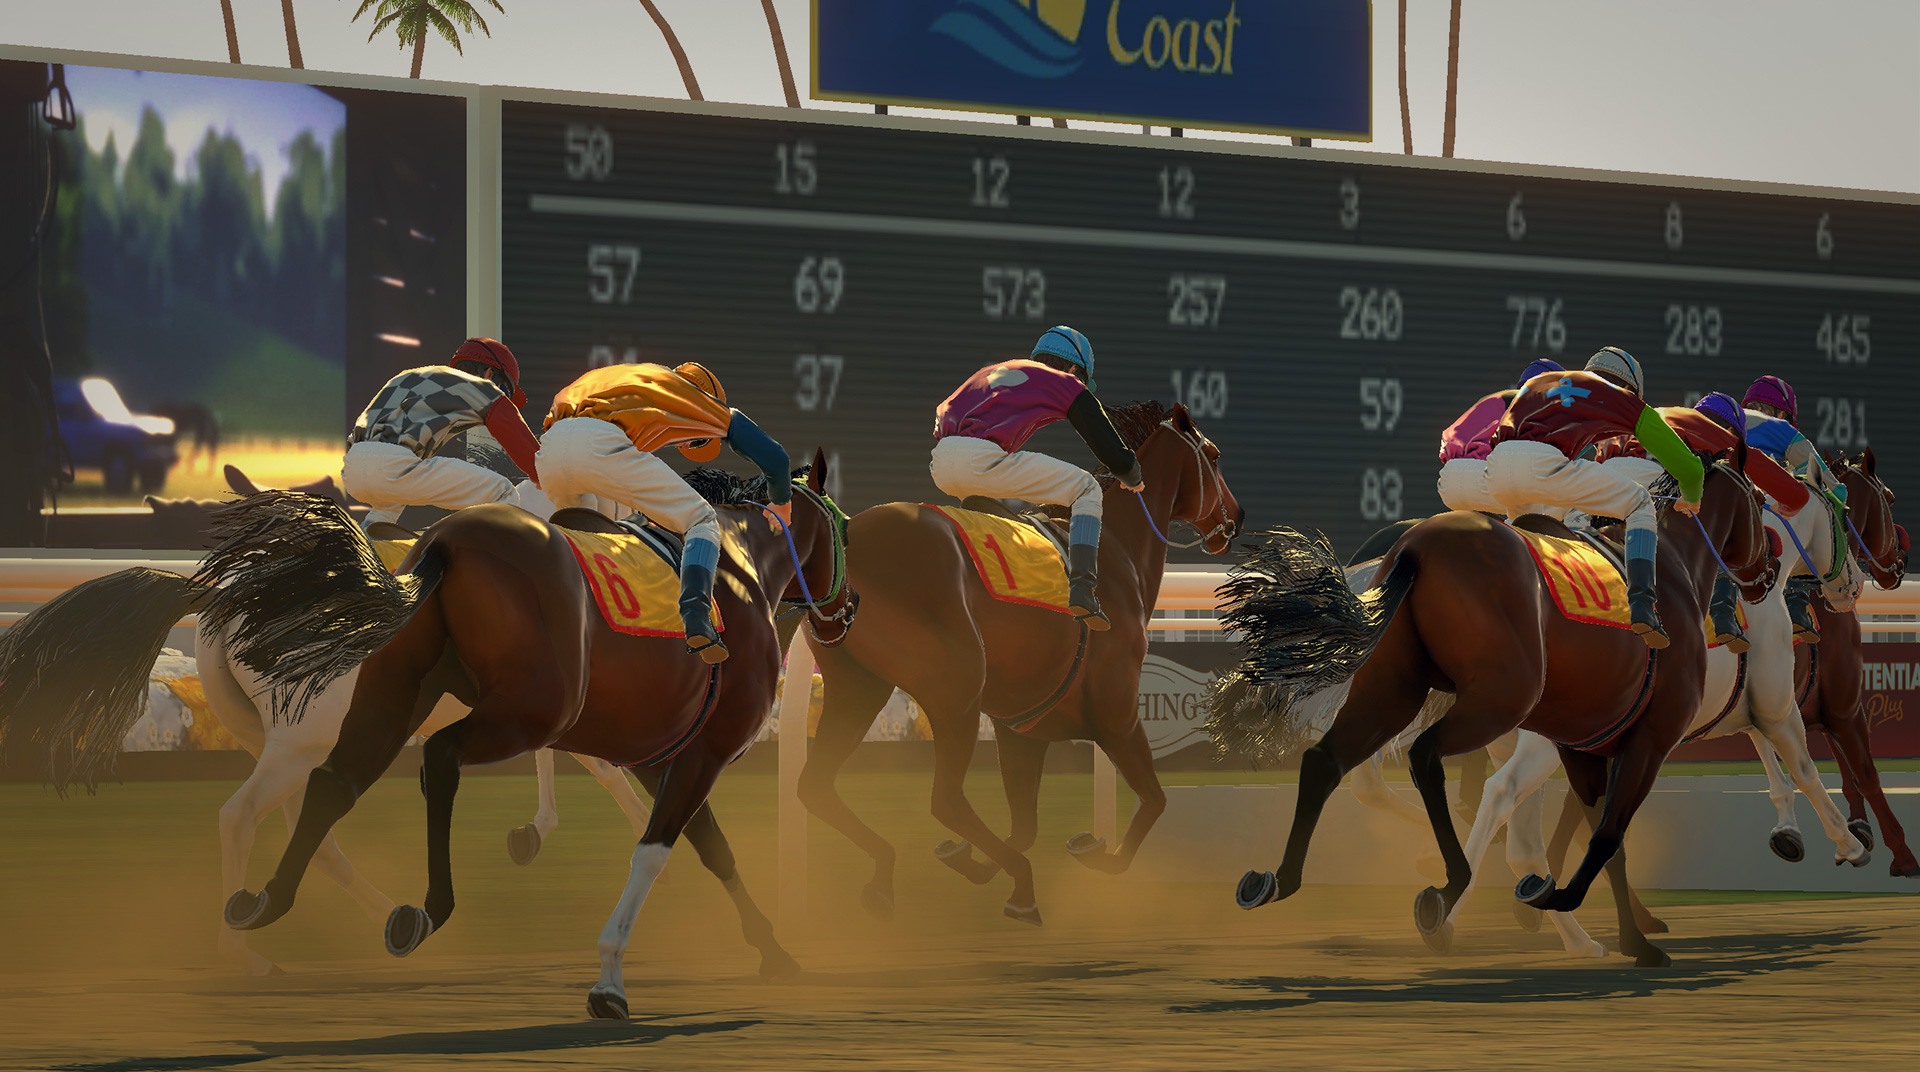 Horse racing apps free download adobe photoshop cs3 free download for windows 7 32 bit